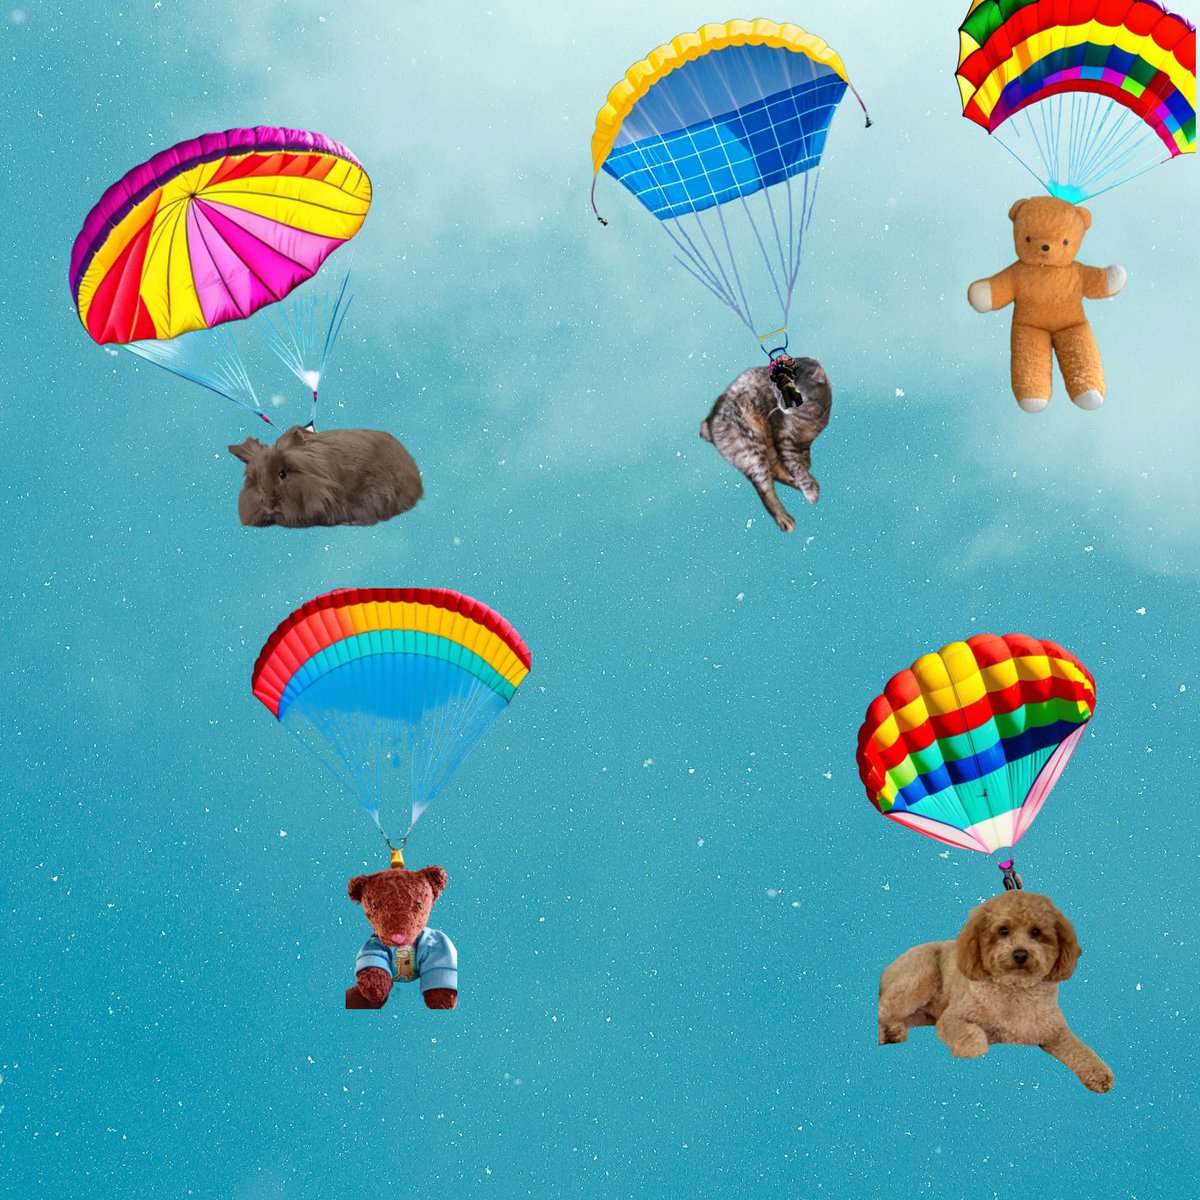 Some of me fwens parachting! Mom reached her image limit on dis pic, so she be making anuvver one ! So keep watching! In dis pic, we got, clockwise from top left: Reggie @Rosie_fluffybun Ruthie @all_fur_matters Orange Bear @monkey_maisie Milo @kweeos , Raspberry @joans1963